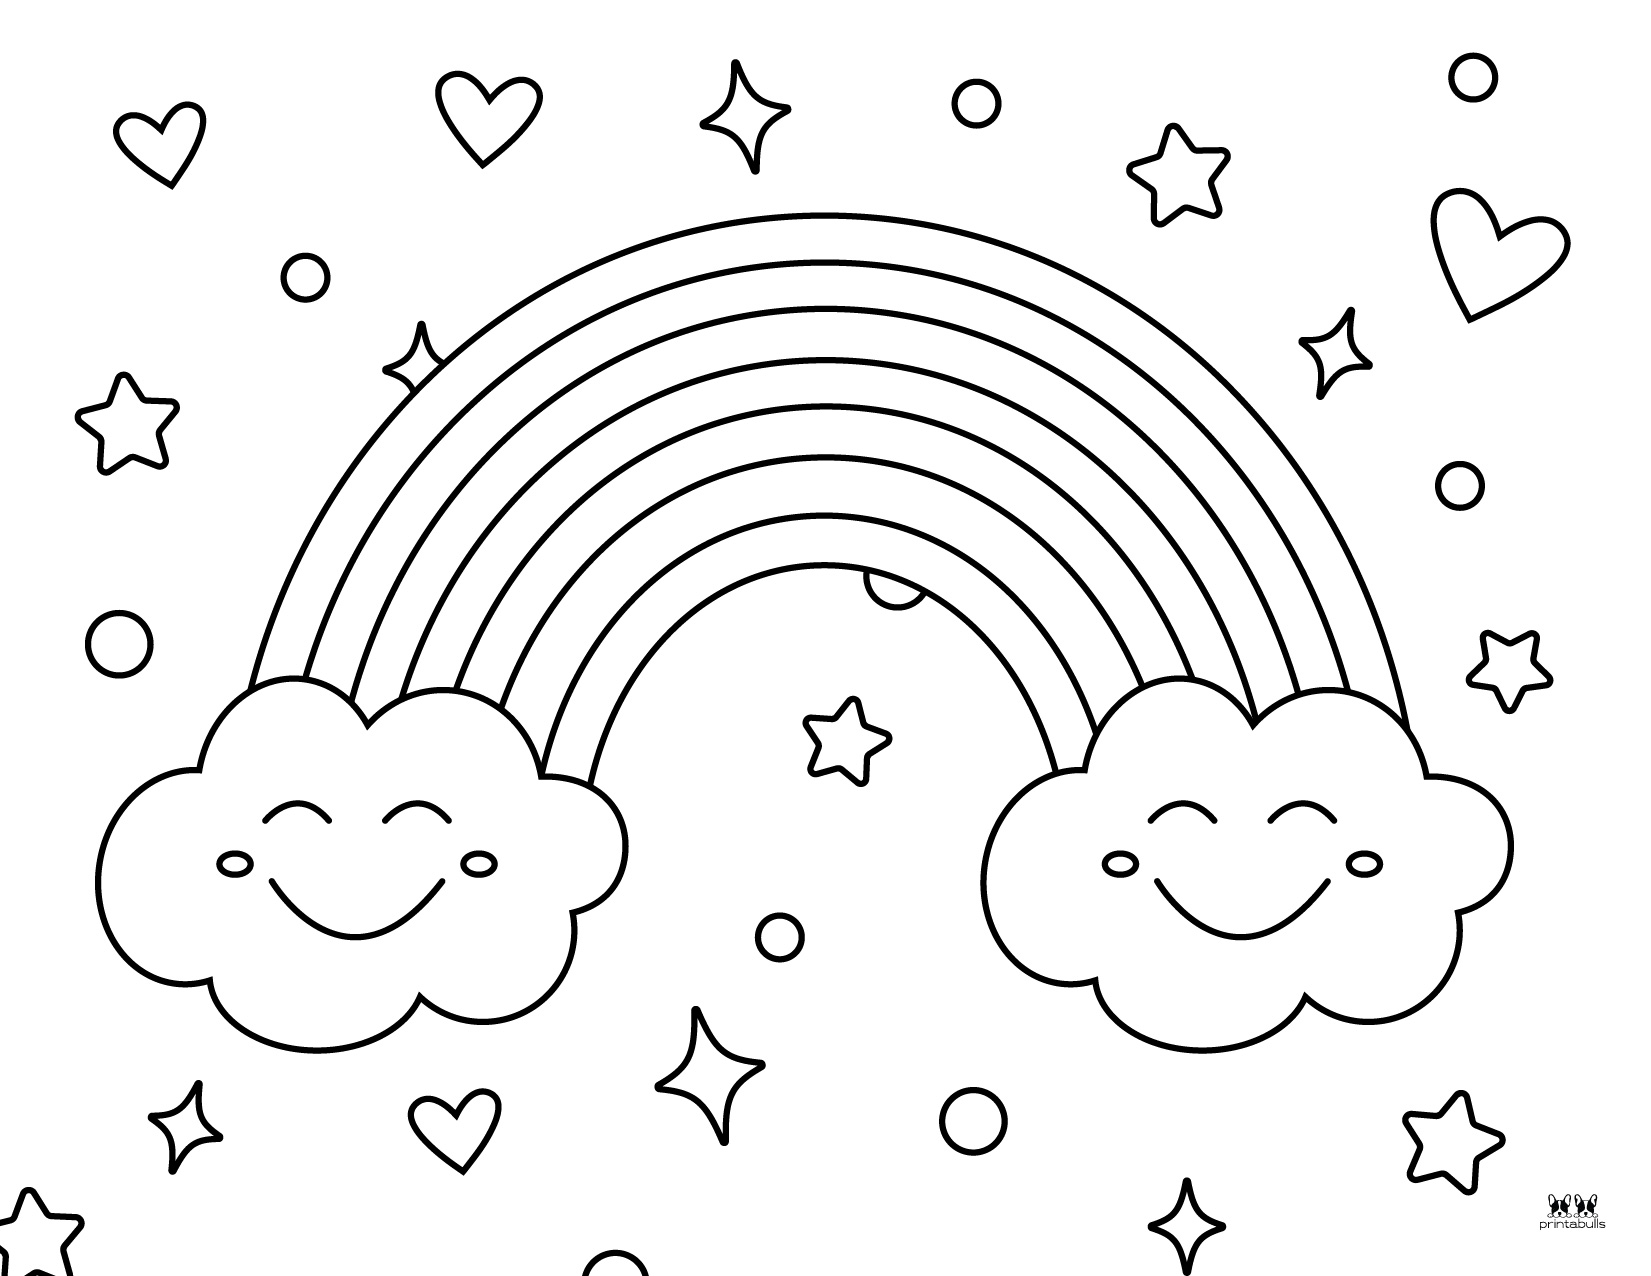 rainbow-coloring-pages-50-free-printable-pages-printabulls